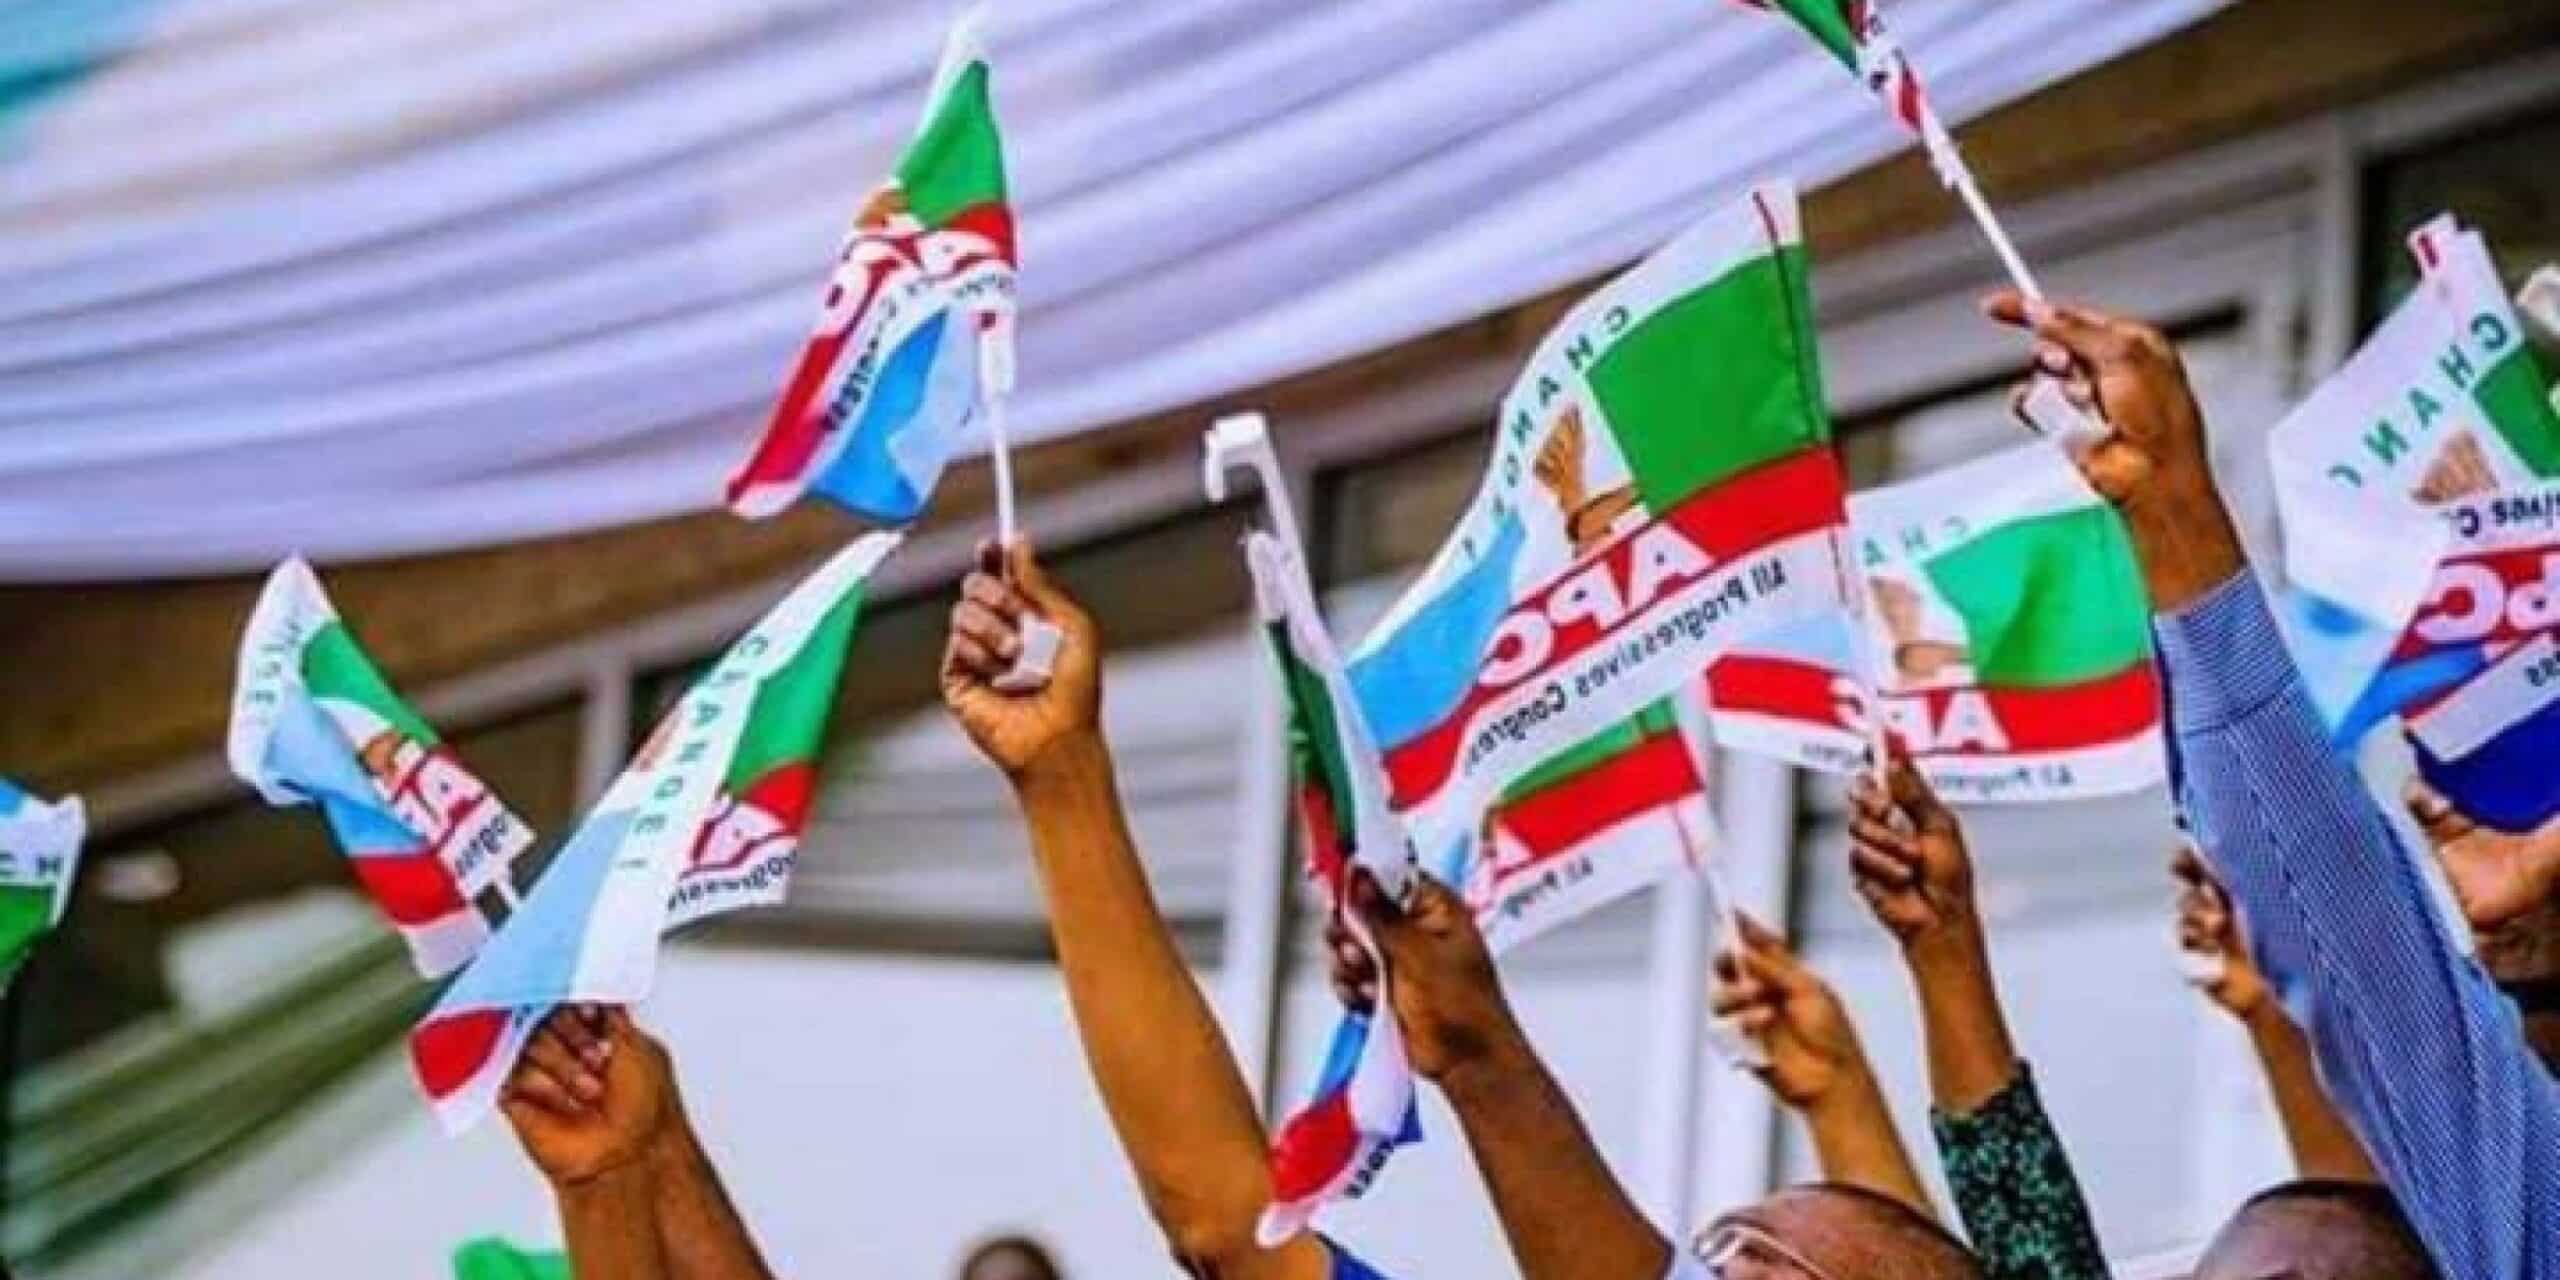 APC rally in Kogi State allegedly disrupted by swarm of bees